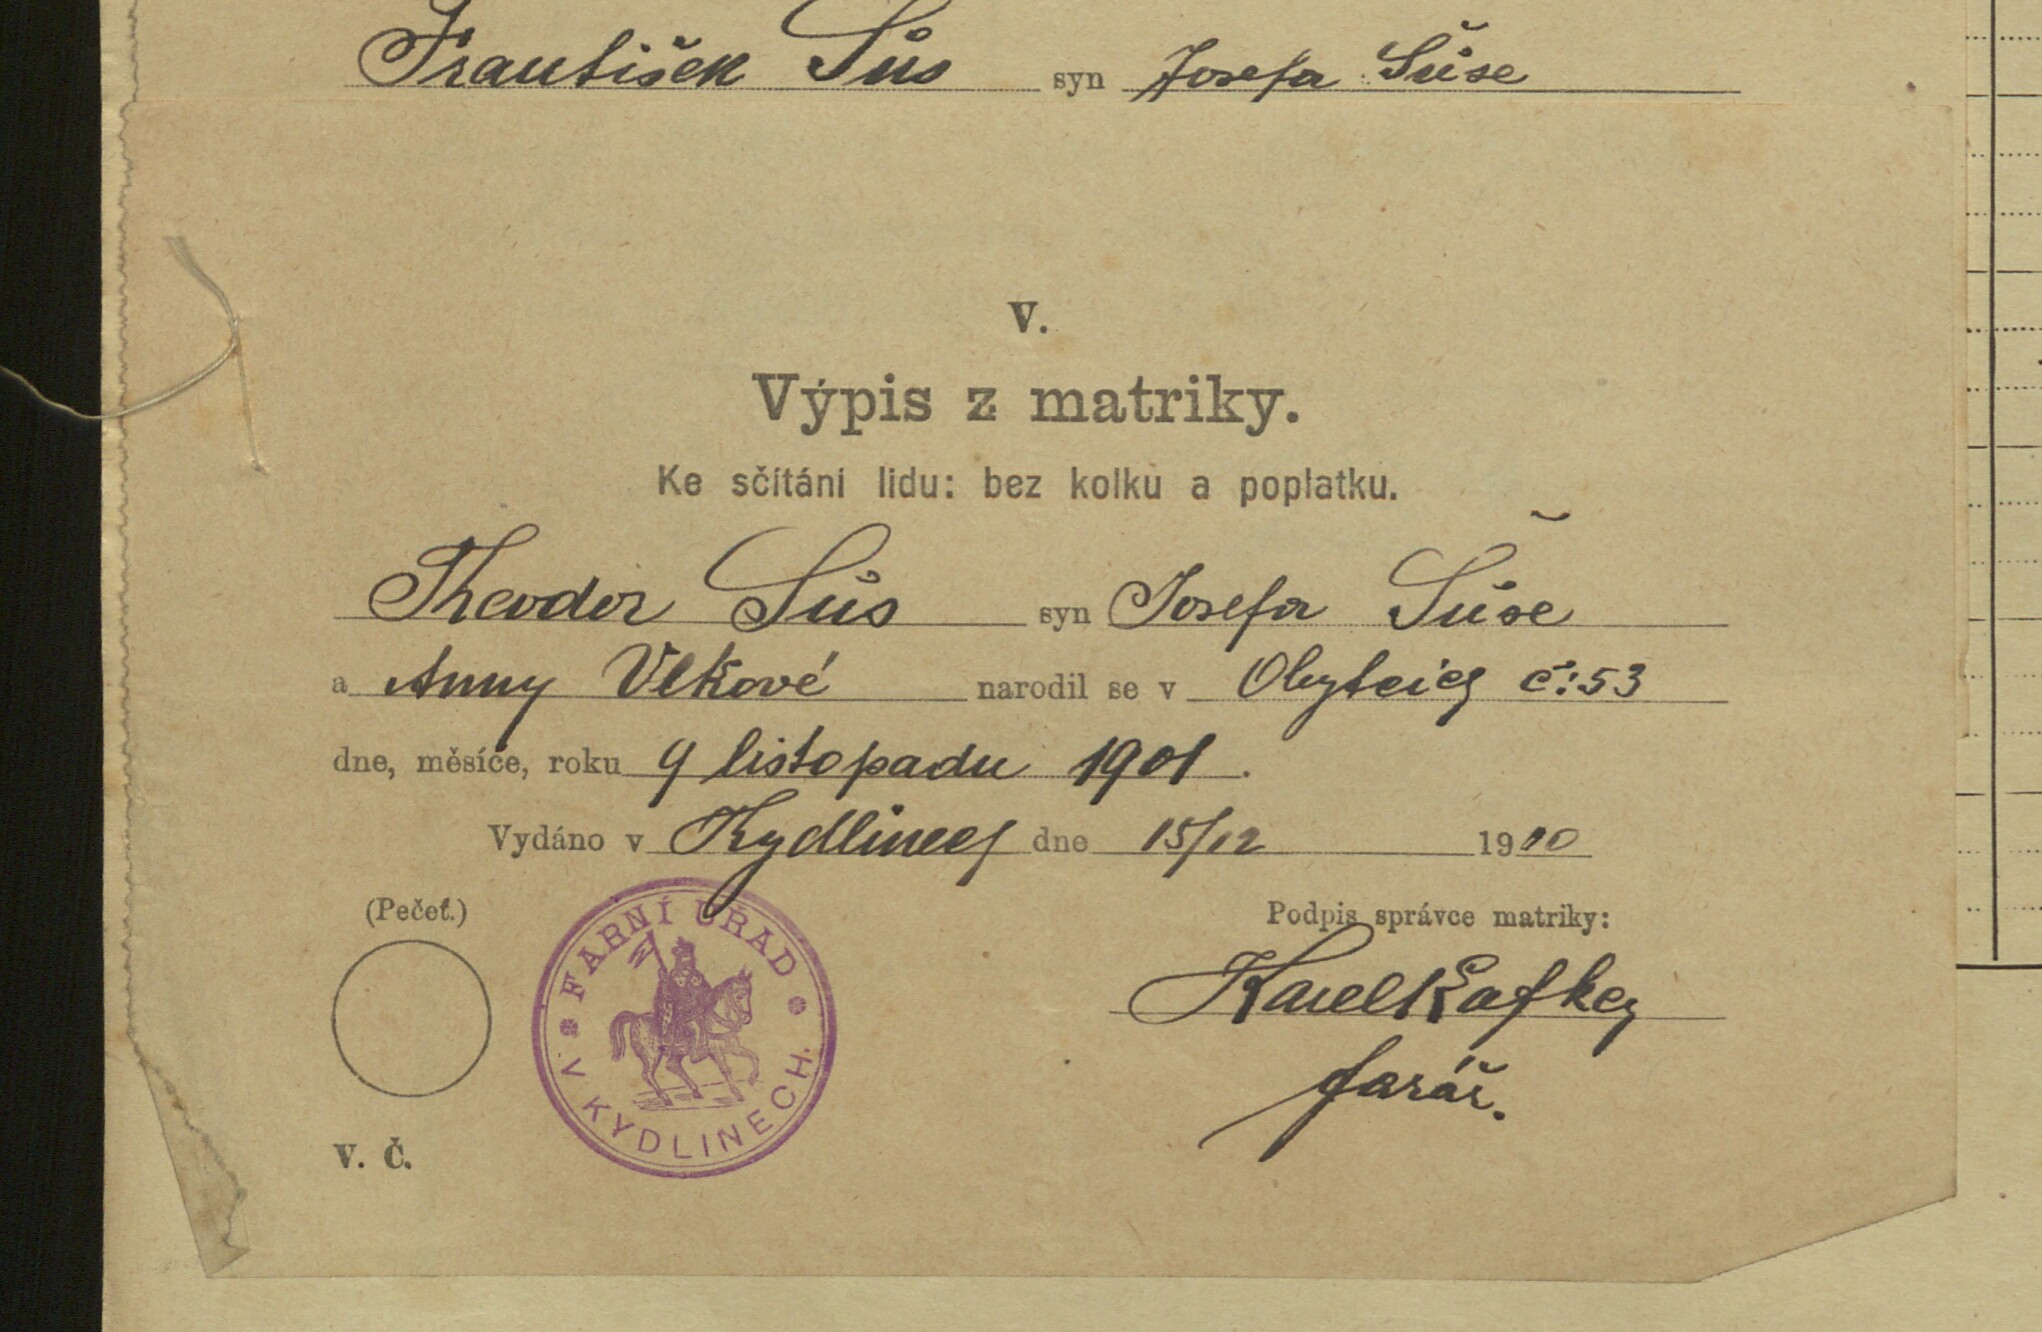 2. soap-kt_01159_census-1910-obytce-cp053_0020